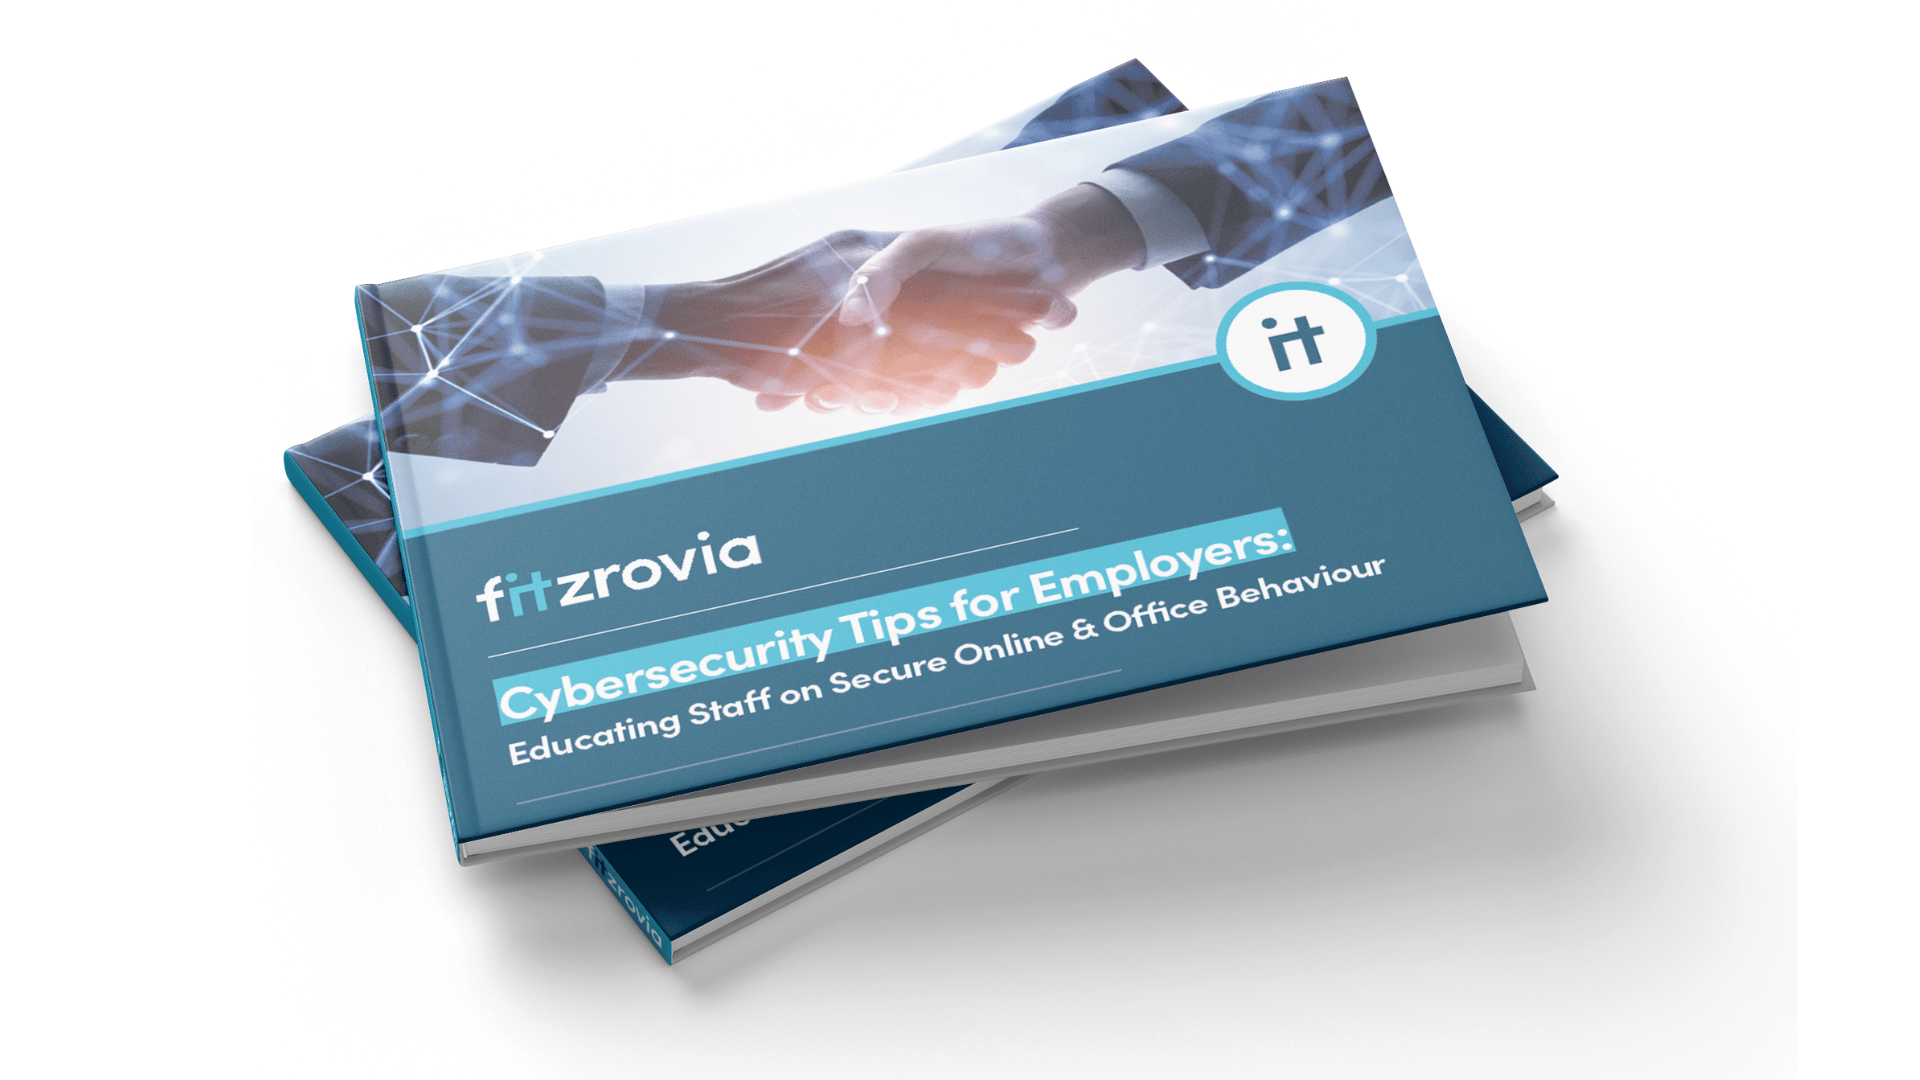 Cybersecurity Tips for Employers